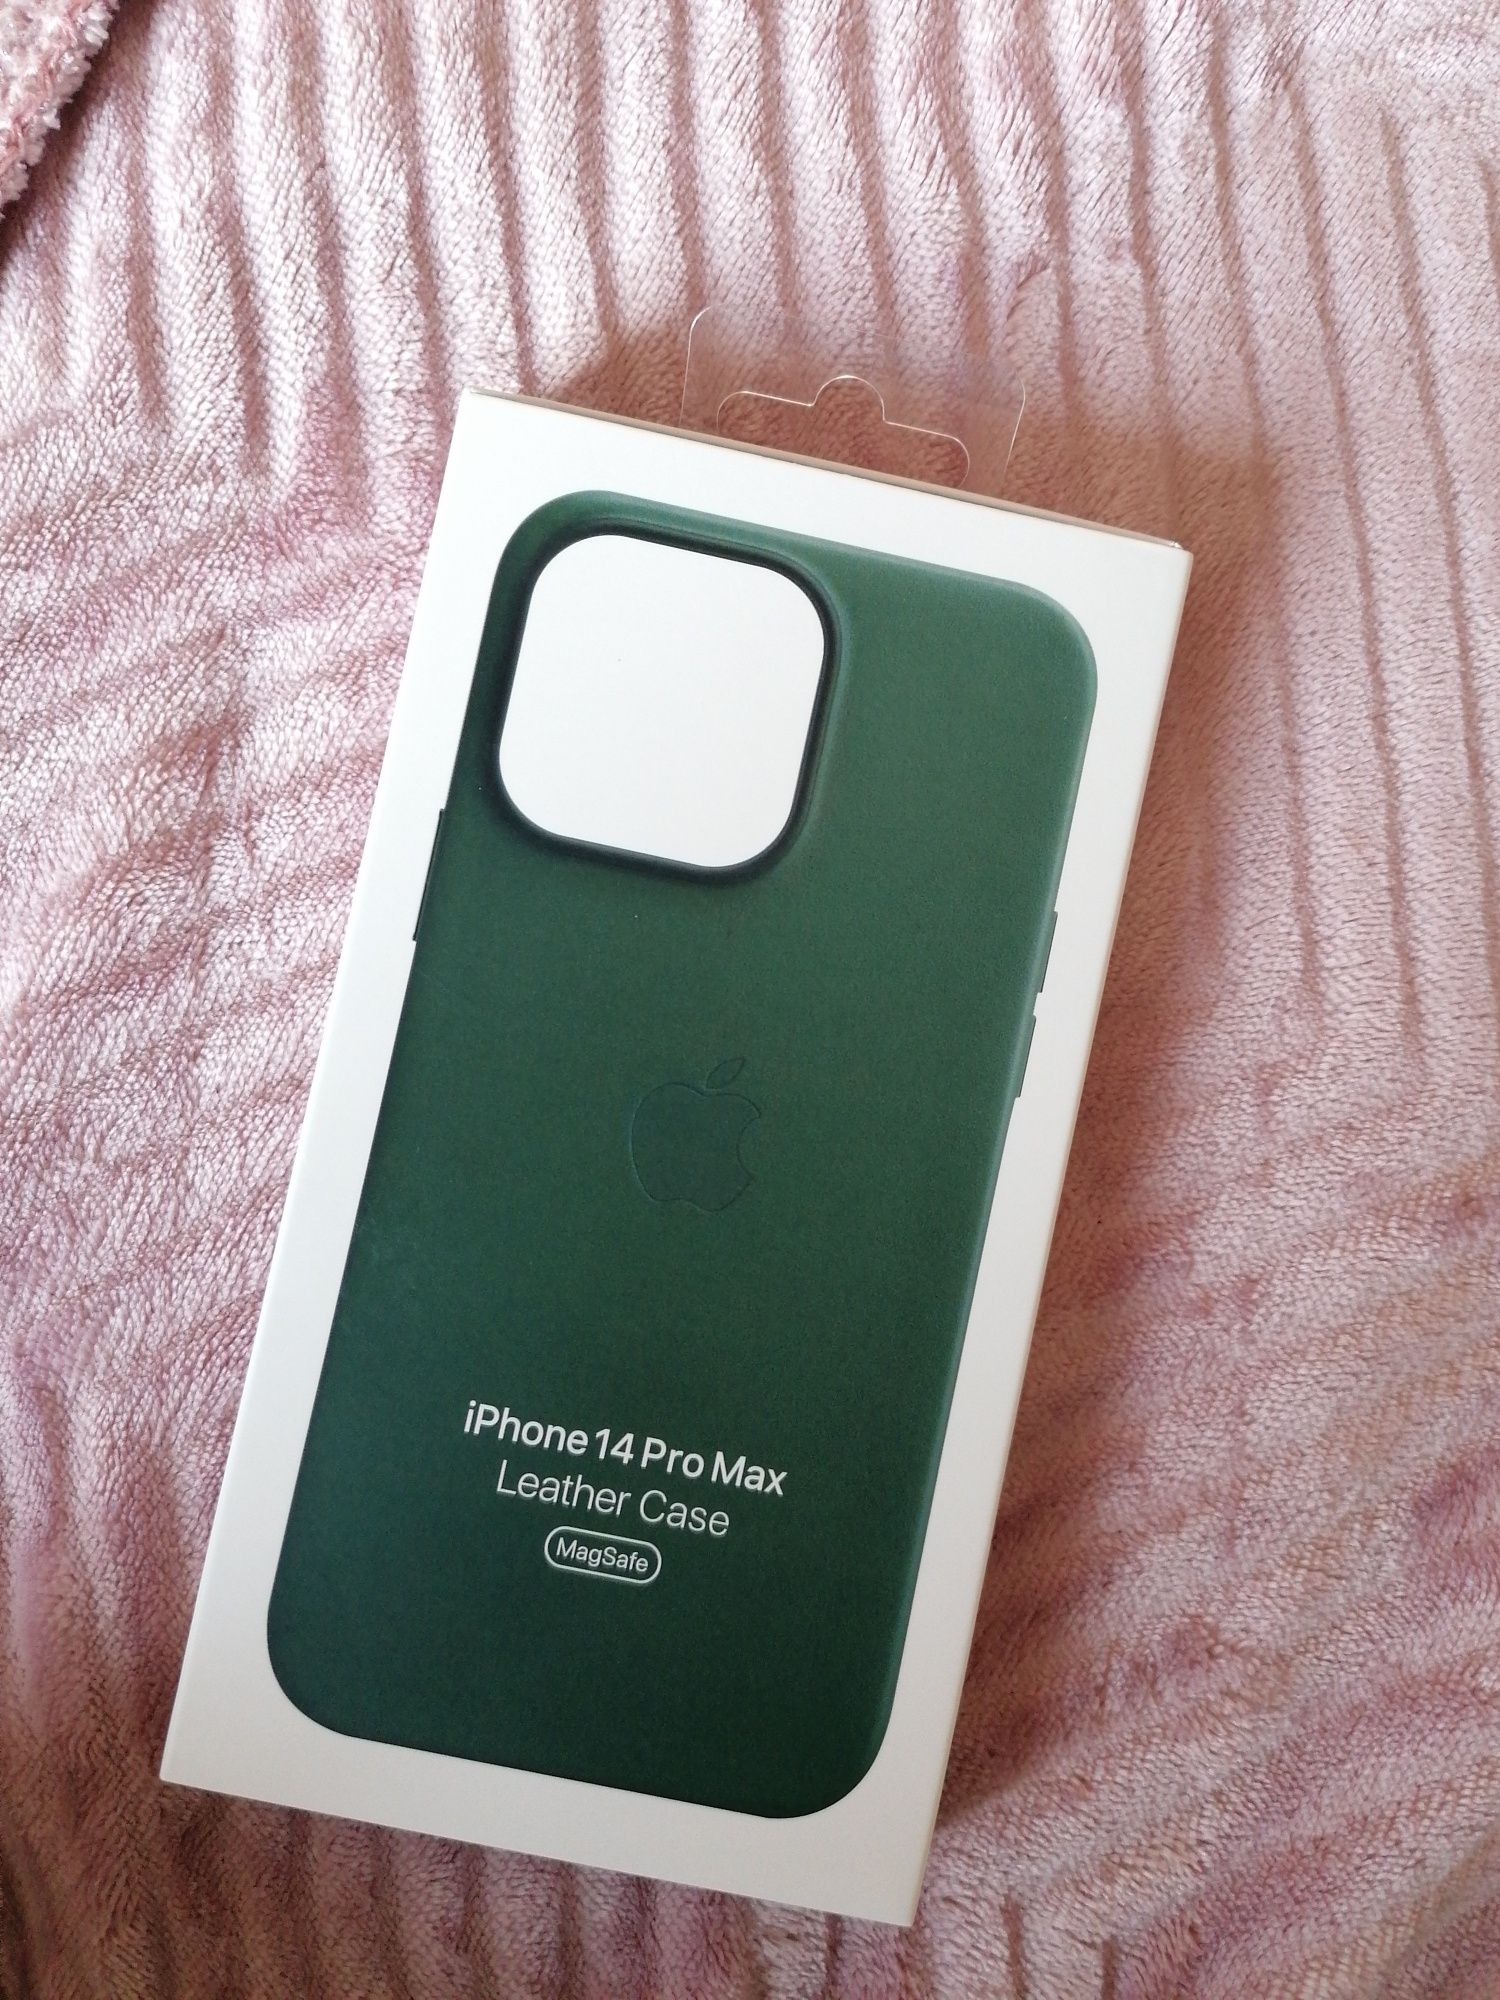 Iphone 14 pro max 128gb silver + leather case forest green + peliculas